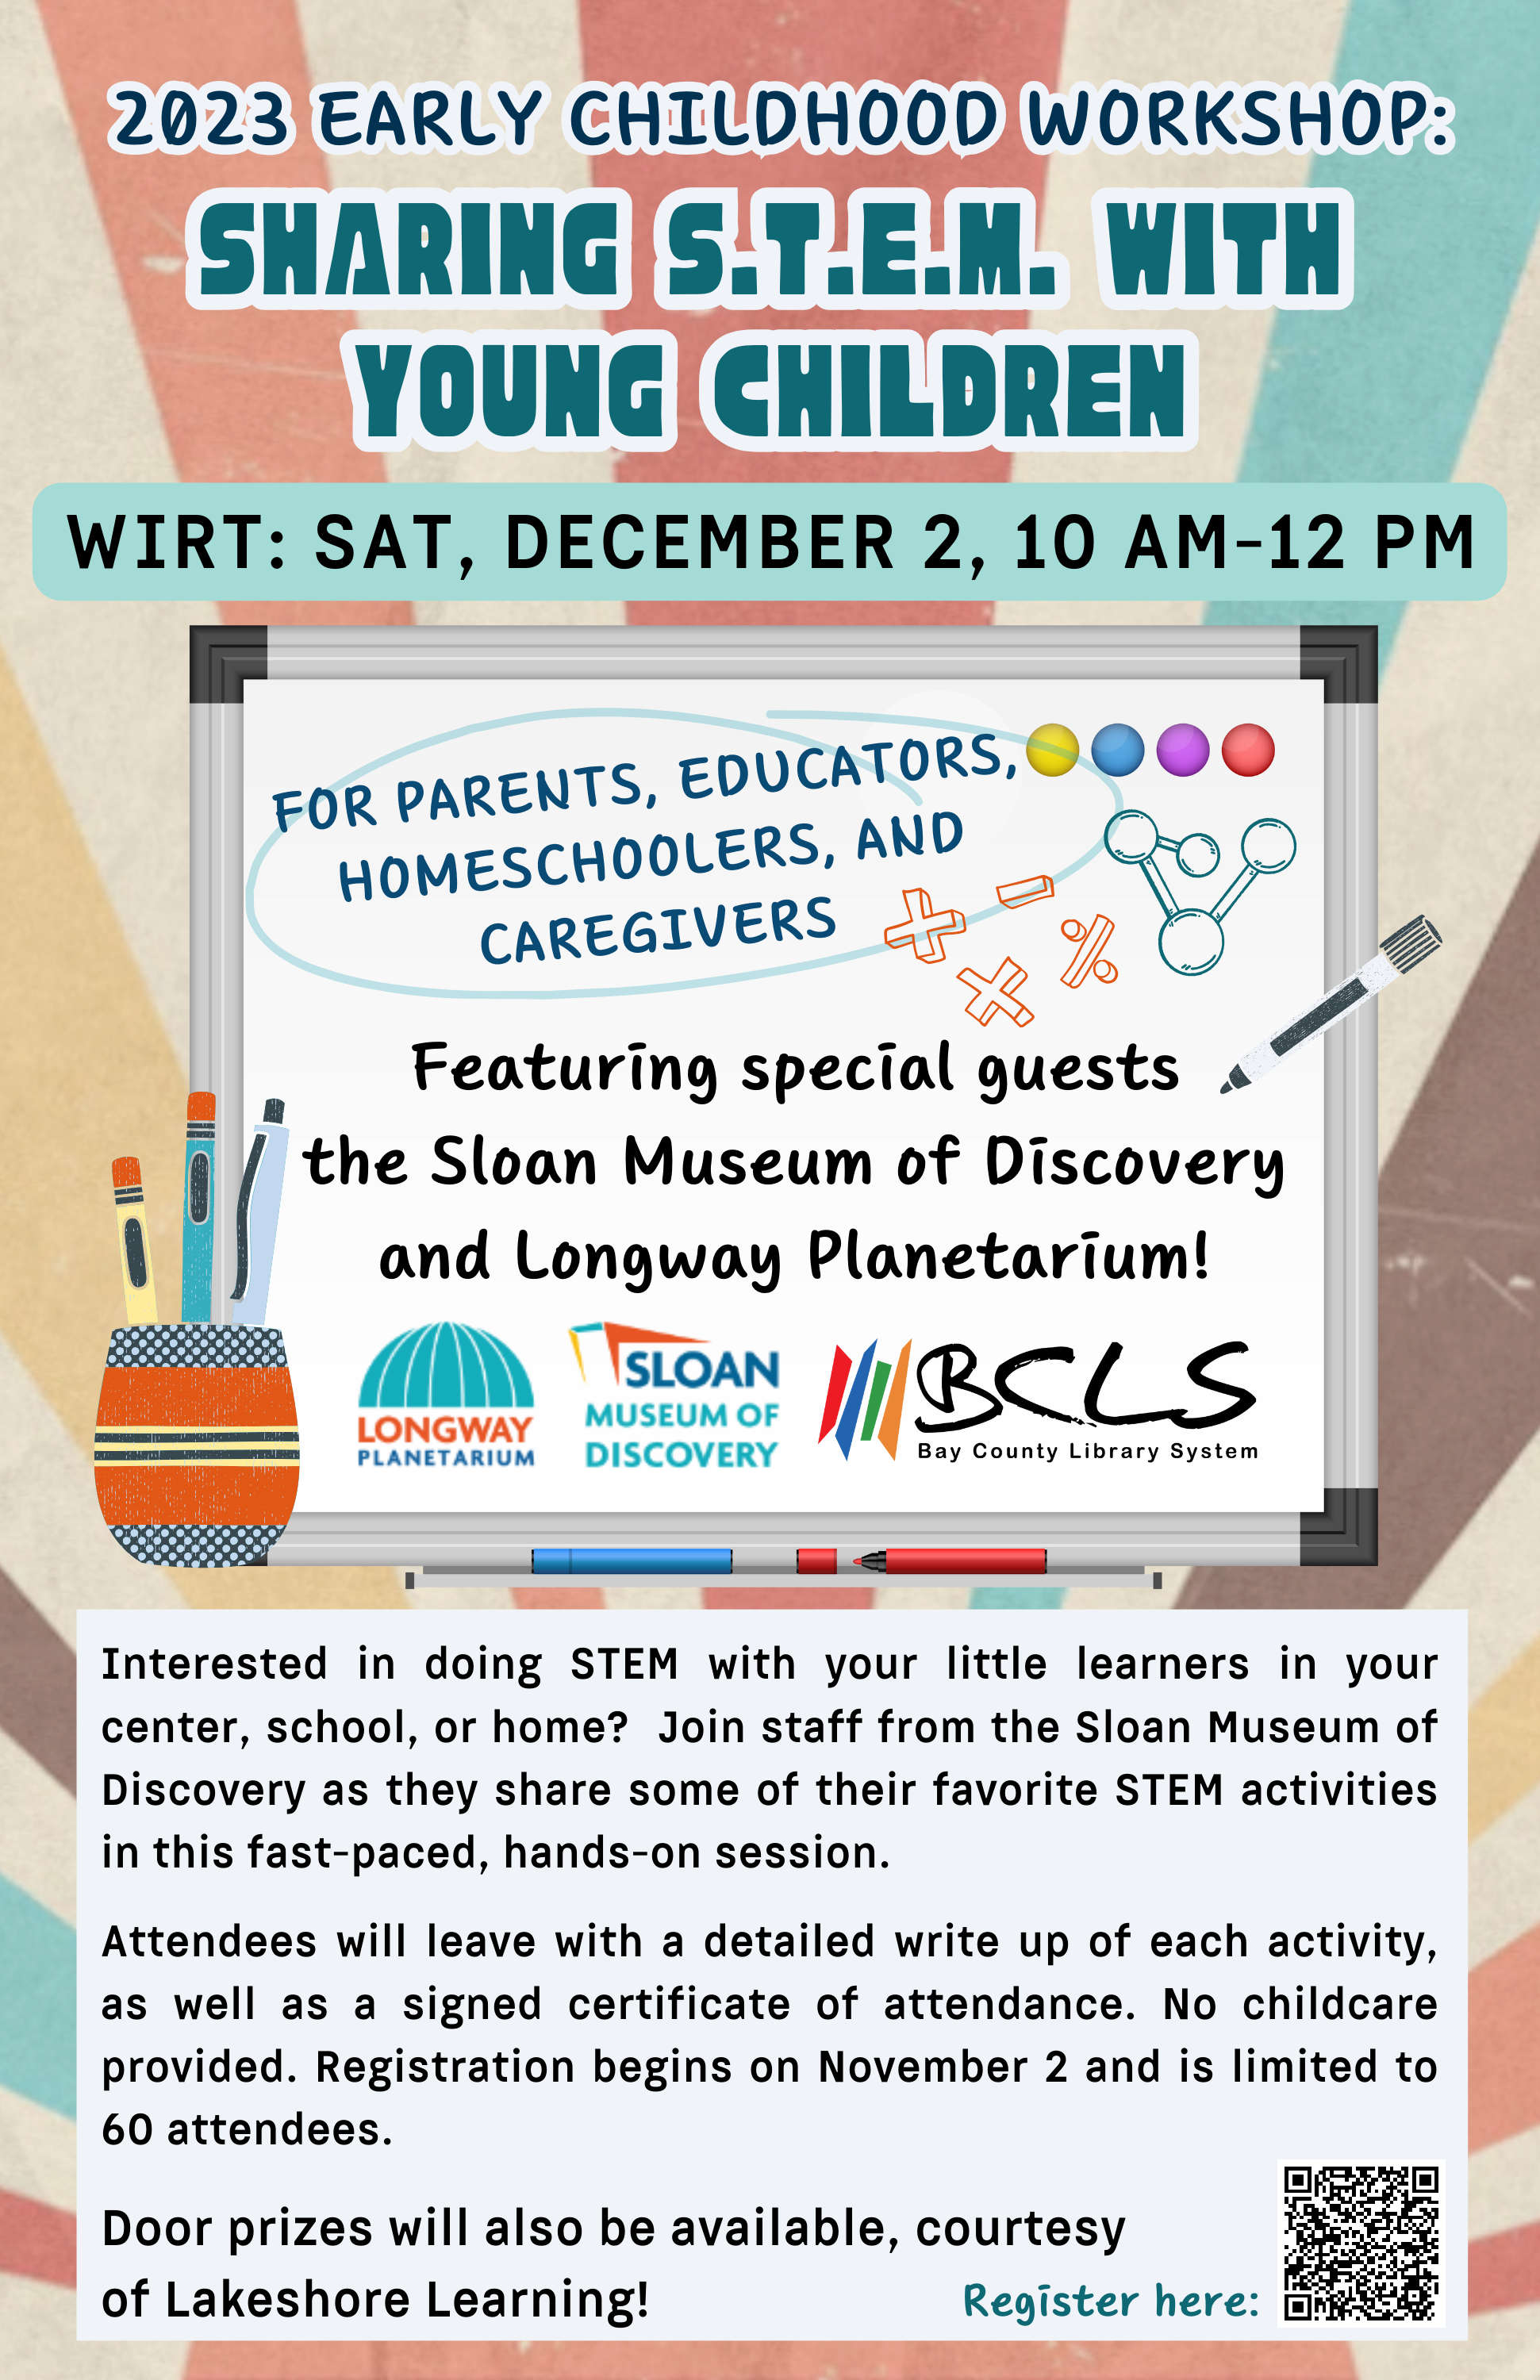 Sharing STEM with Young Children flyer